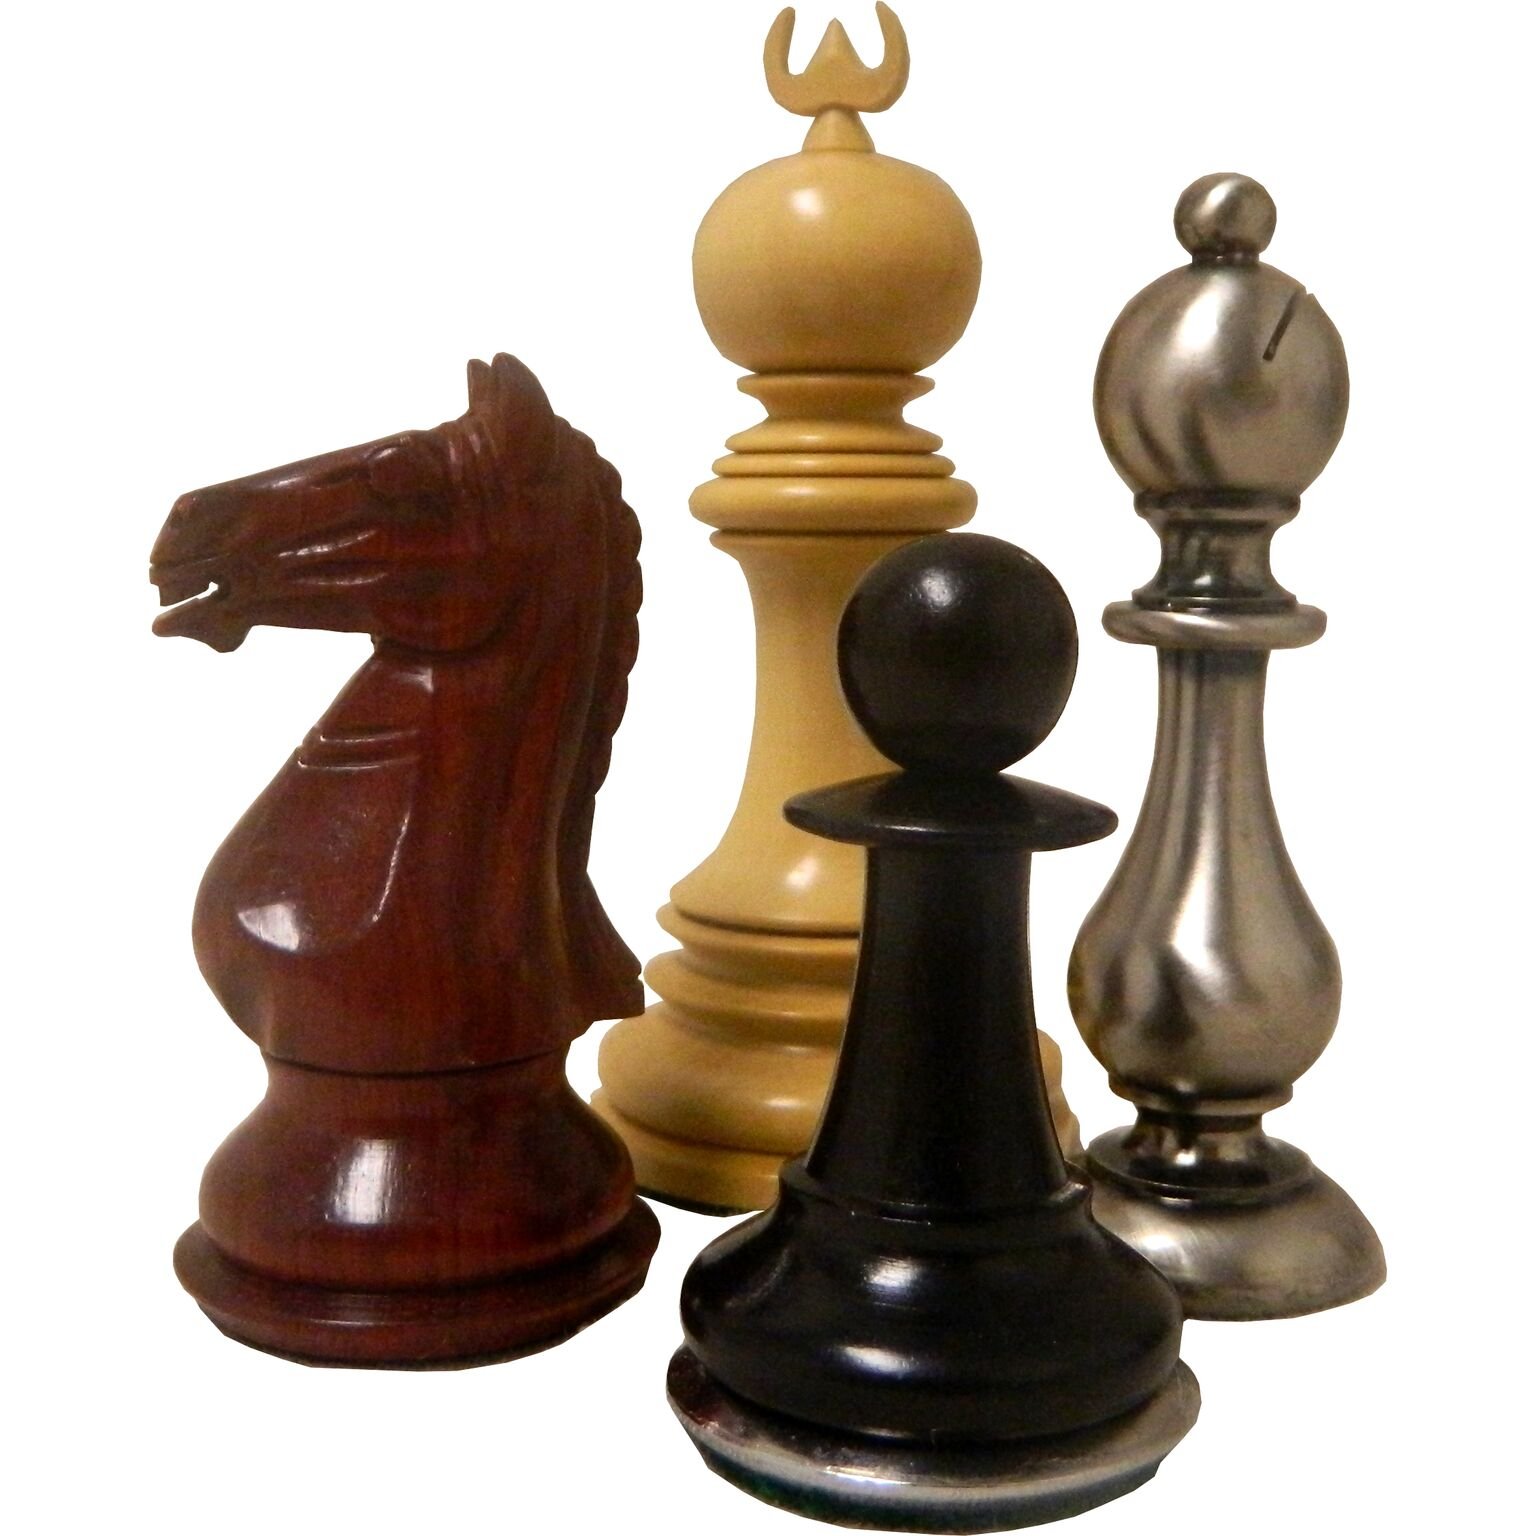 Chess Sets for Beginners, Club Players, and Collectors at The